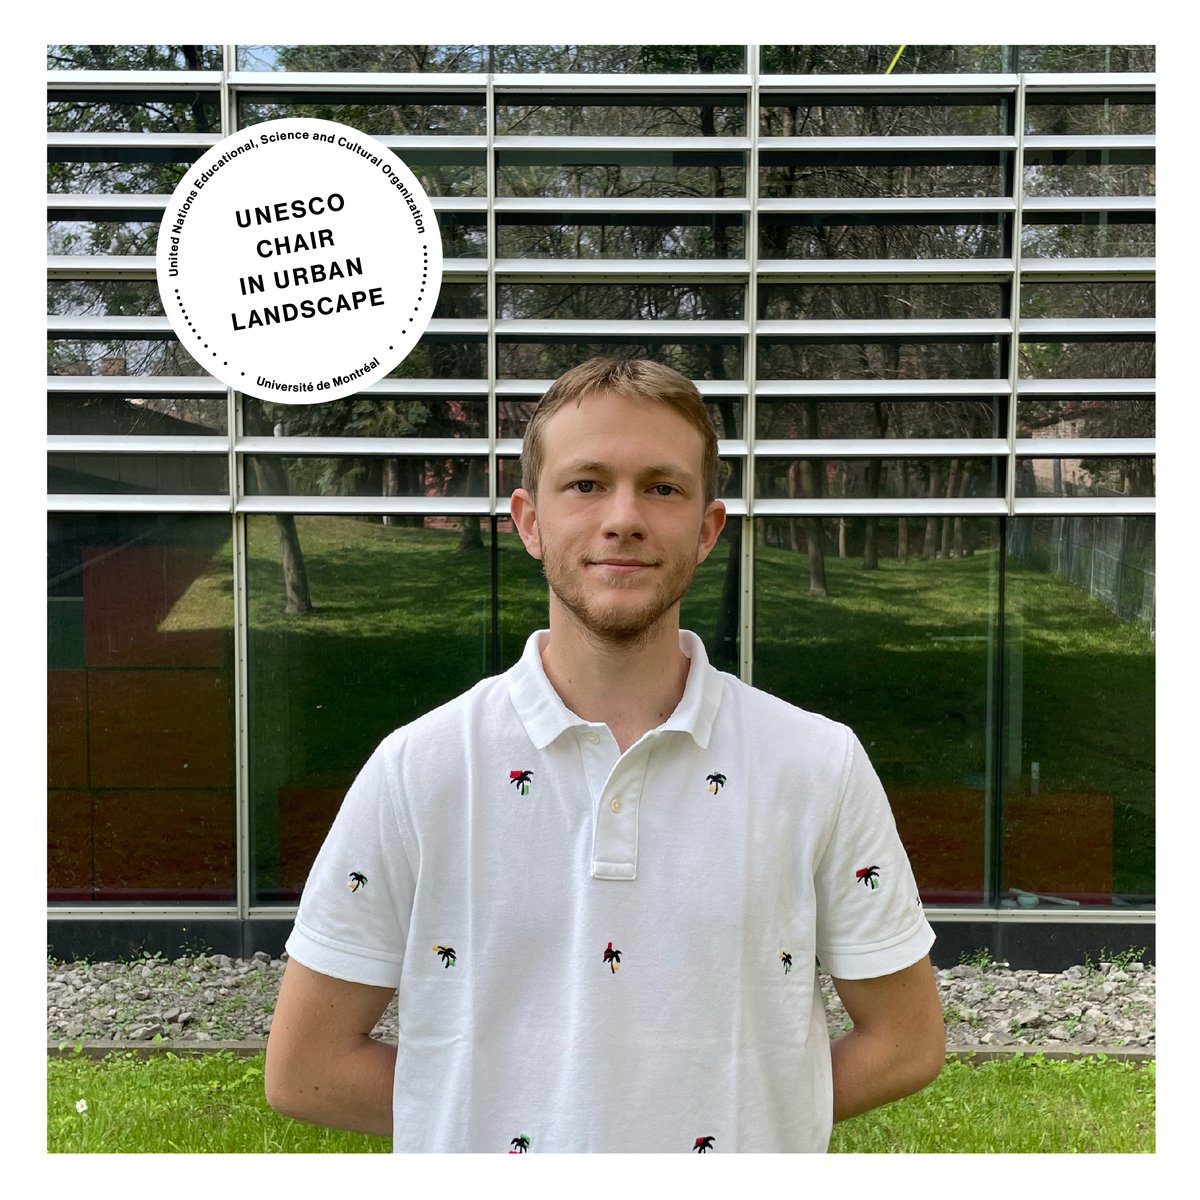 🔦SPOTLIGHT INTERN - Meet Florian Husson, engineering student from CESI Nice, who is currently doing his internship at the @unesco_studio. Florian is participating in the 5G project; on fostering the integration of 5G antennas in the urban landscape. #5G #technology